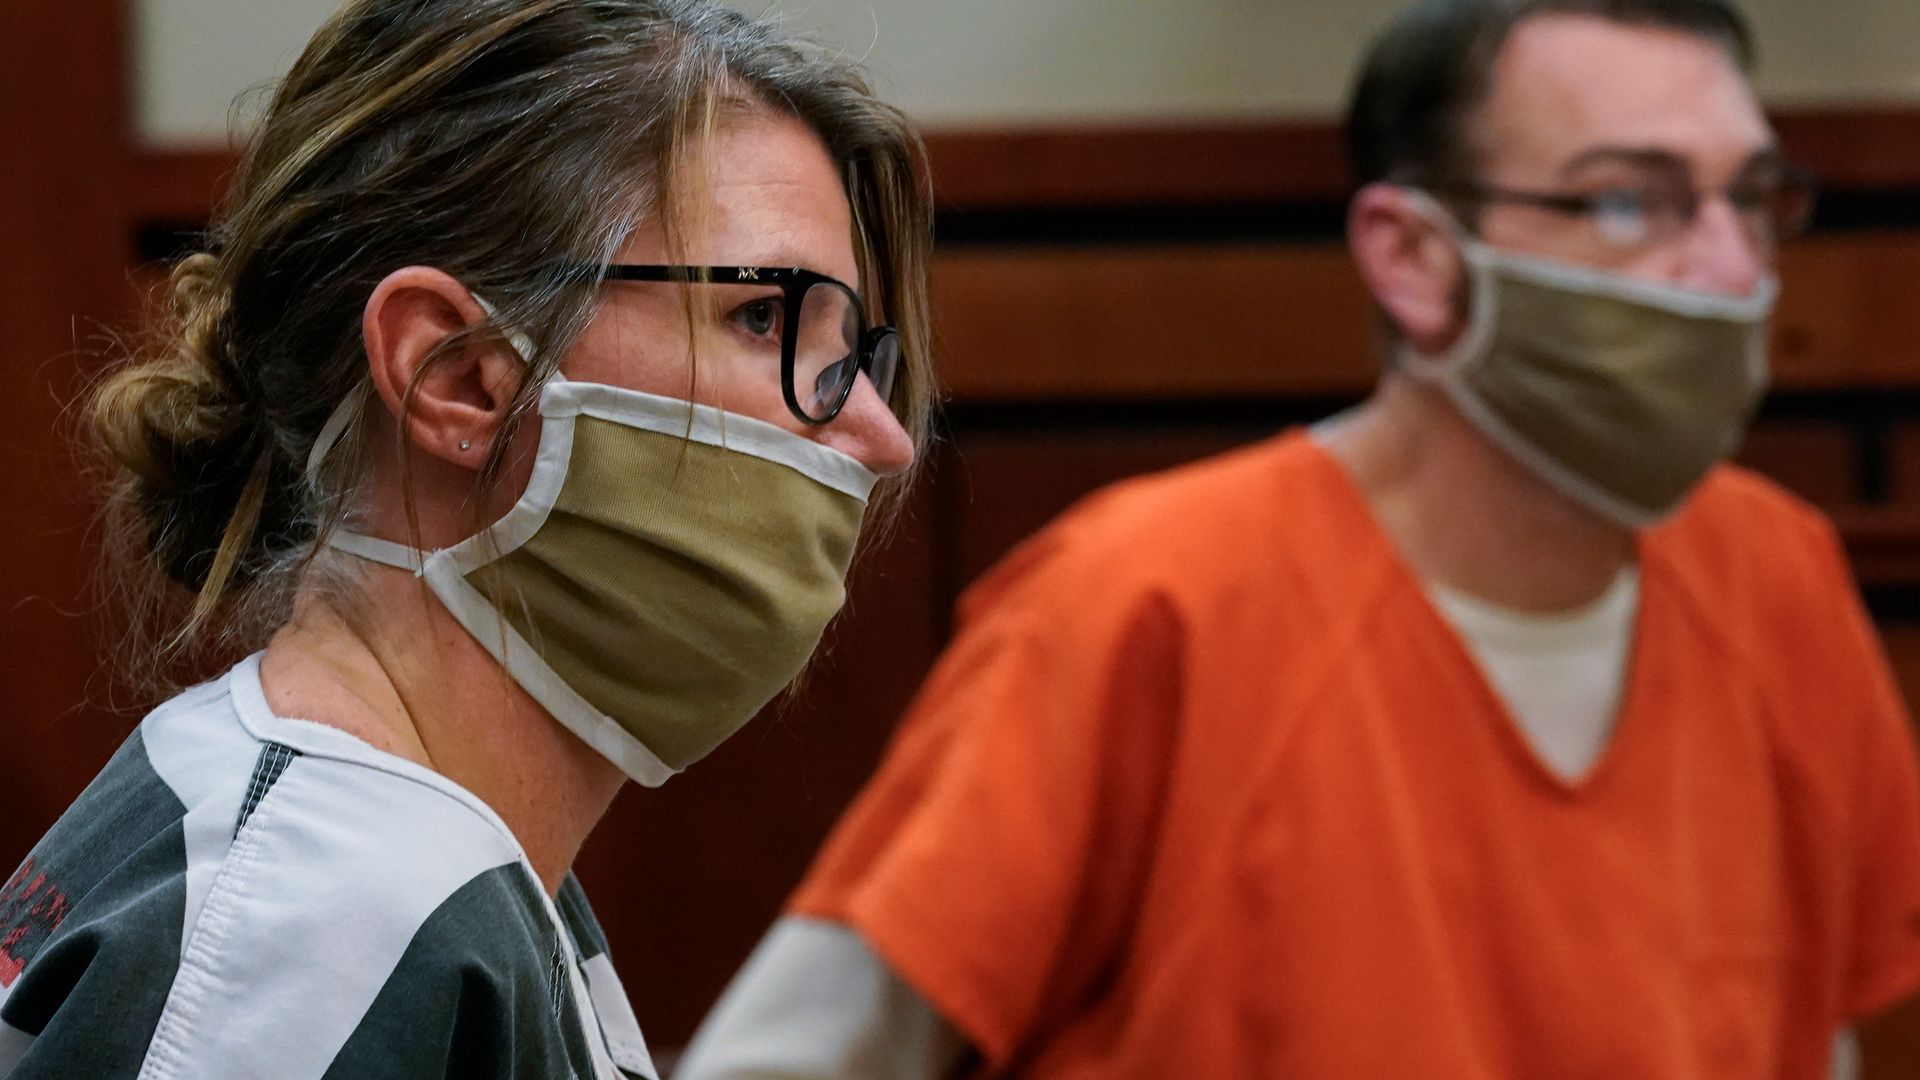 The negligent mother of Michigan school shooter Ethan Crumbley has correctly been found guilty of involuntary manslaughter.